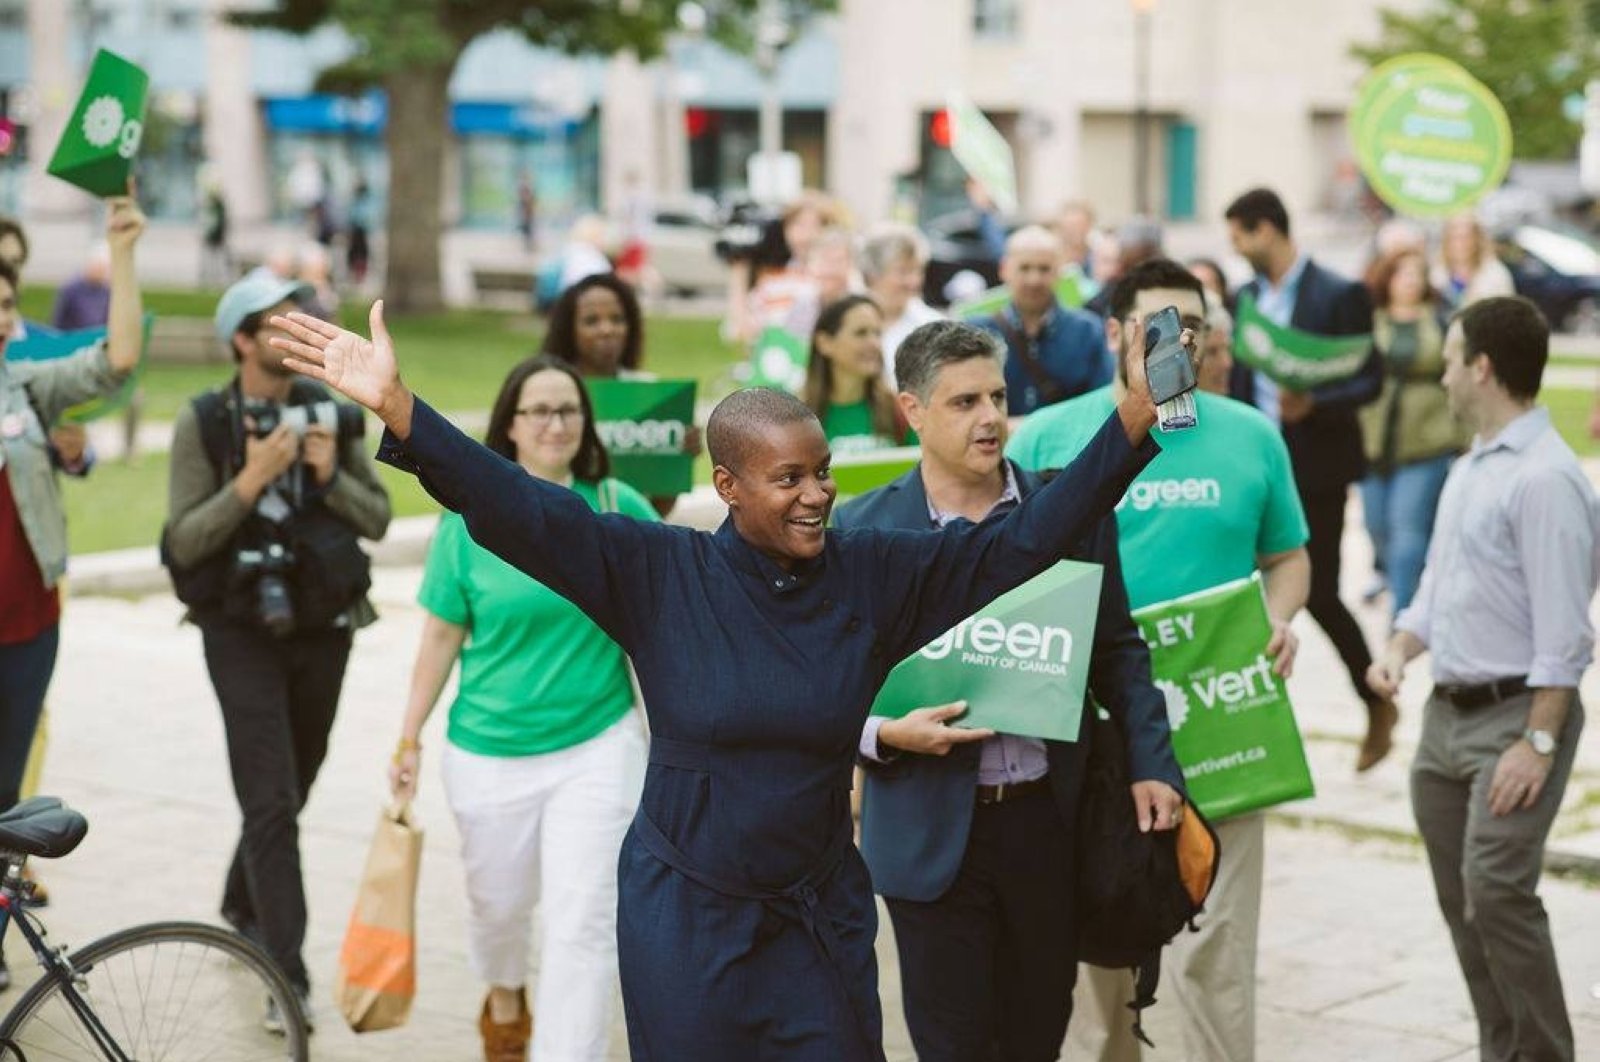 Annamie Paul (C) with Green Party of Canada supporters during the 2019 federal election held in downtown Toronto, Sept. 23, 2019. (Photo from Wikipedia)